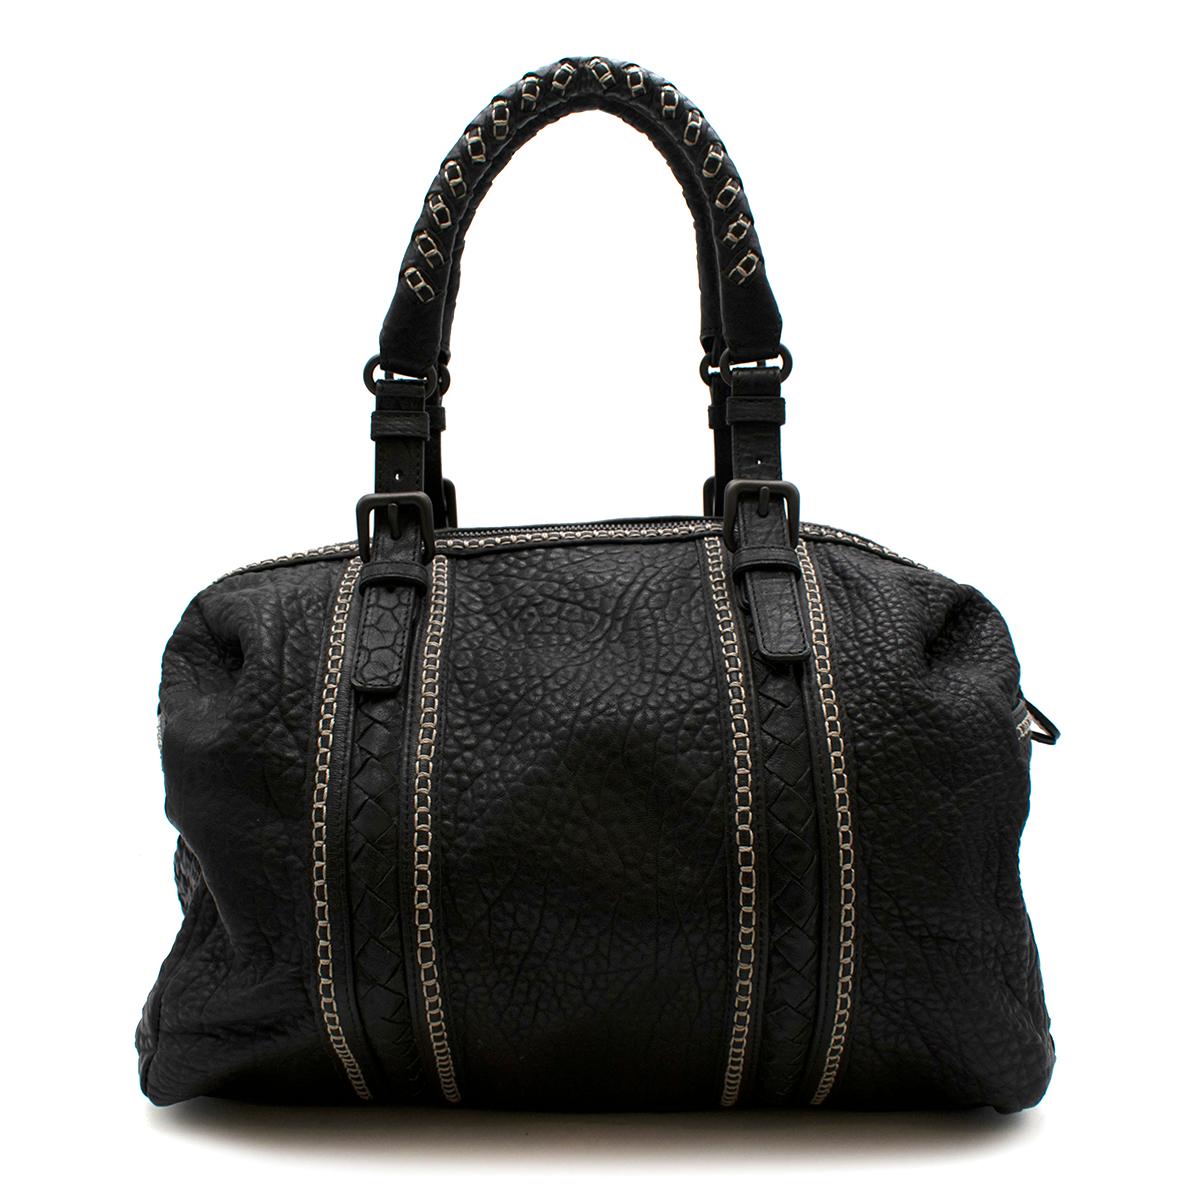 Bottega Veneta Black Handbag 

- Made in Italy
- Black grained very soft outside leather with white stitching details 
- Brown lining in suede 
- Tubular leather top adjustable handle with intrecciato details 

Handle: 19 x 19